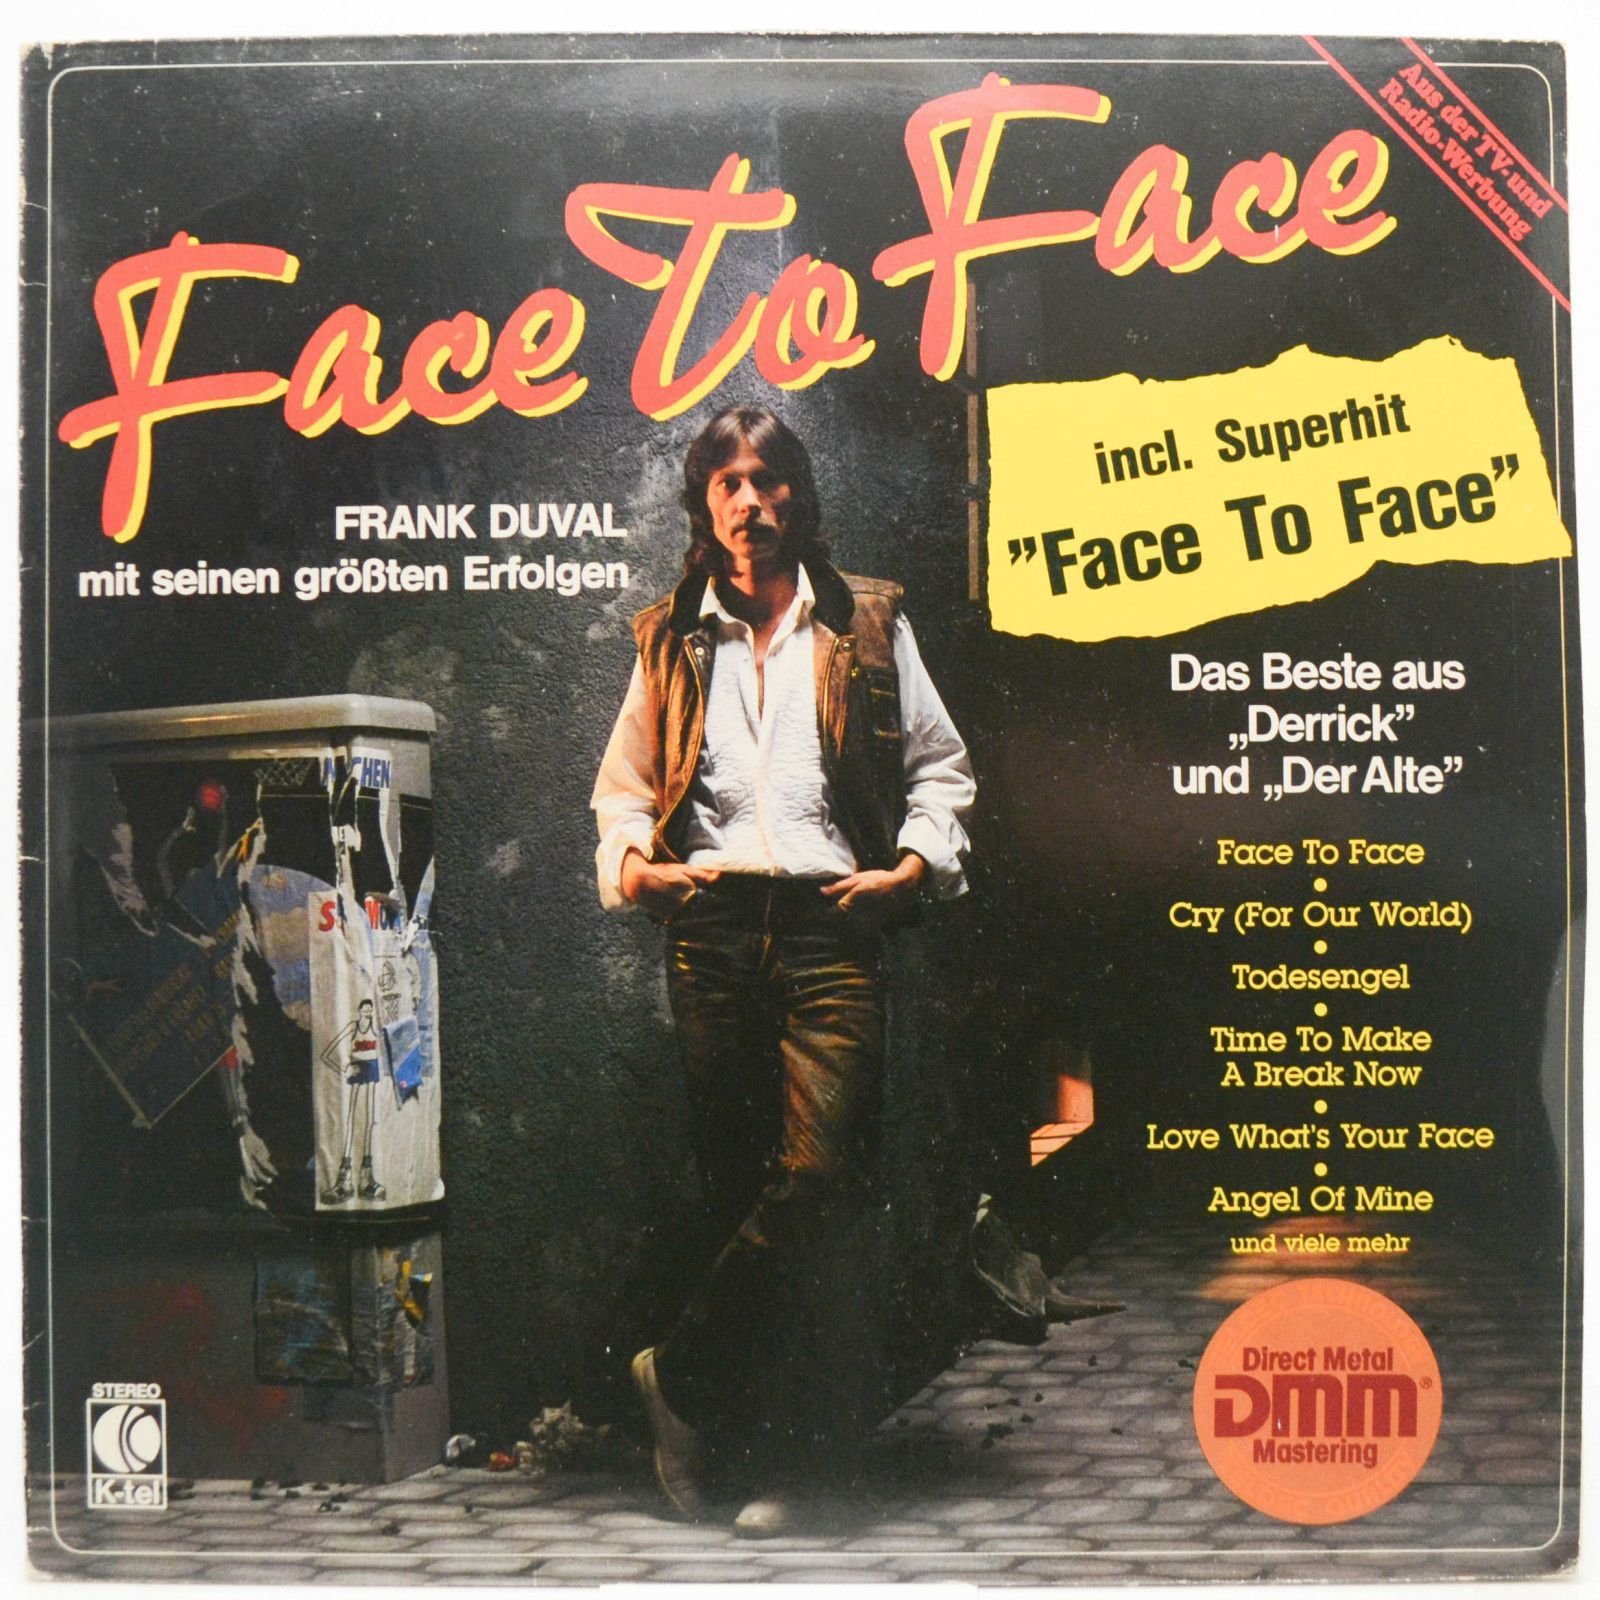 Frank Duval — Face To Face, 1982